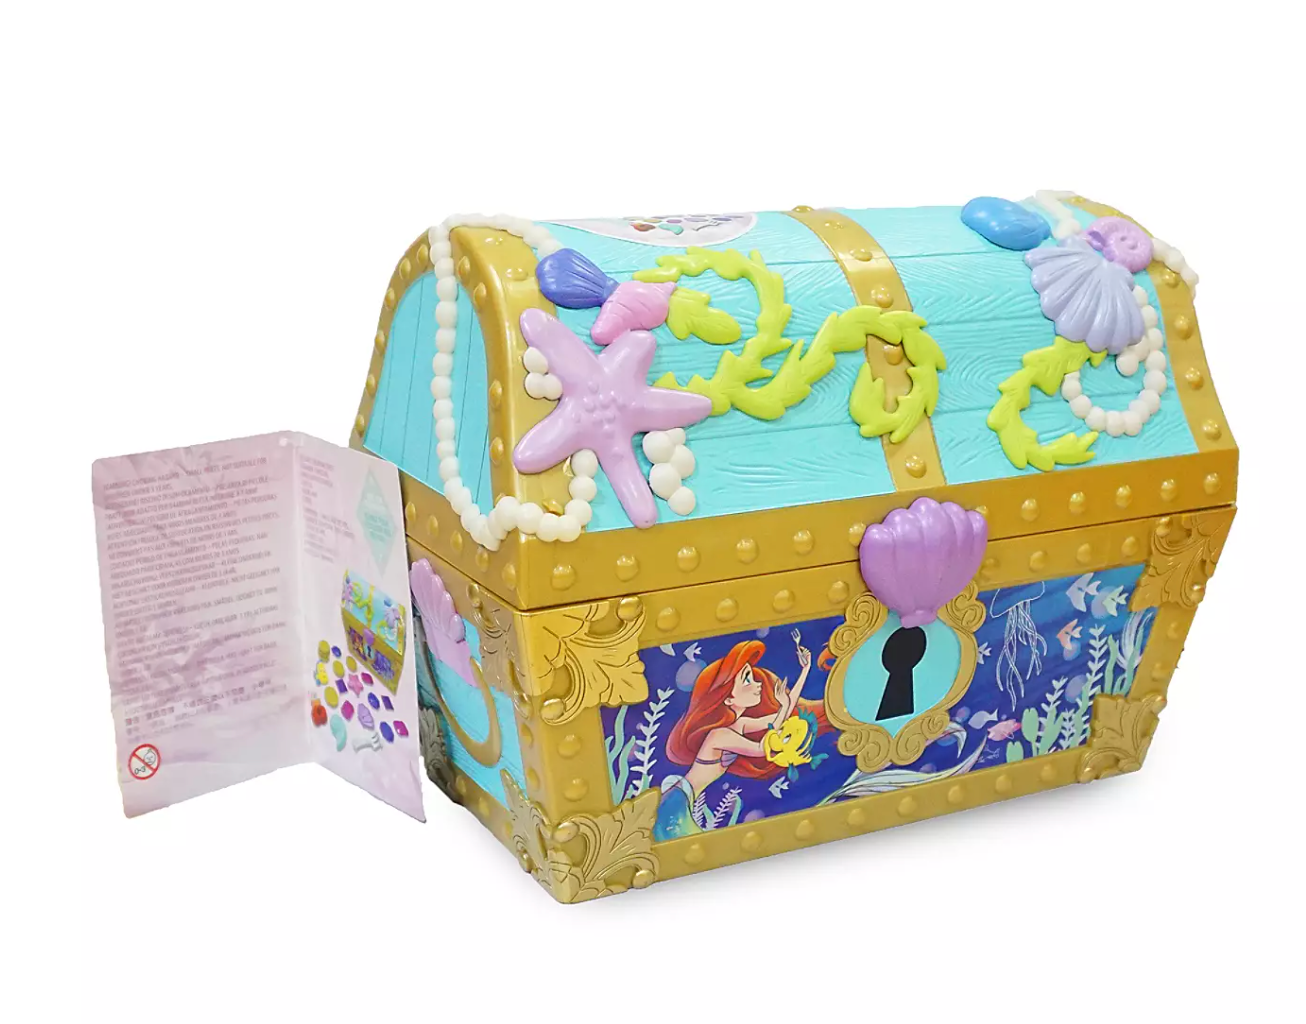 Disney The Little Mermaid Ariel Flounder Dive Chest Play Set Toy New with Box